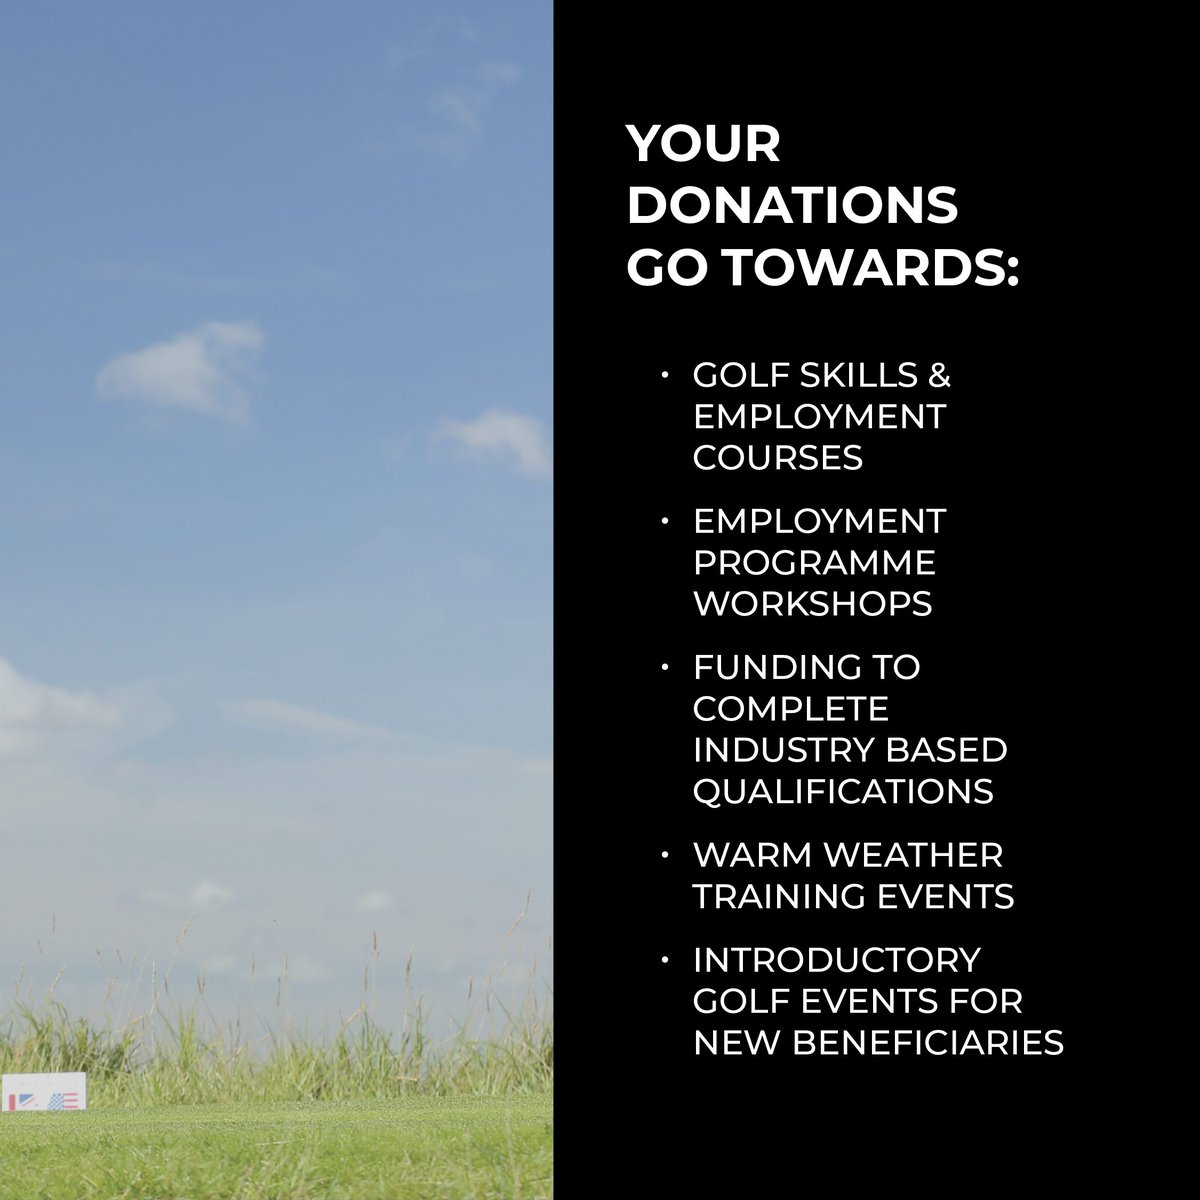 Your donations support our efforts to help injured & sick Service personnel to recover, using the power of golf.
#charitydonation #militarycharity #servicepersonel